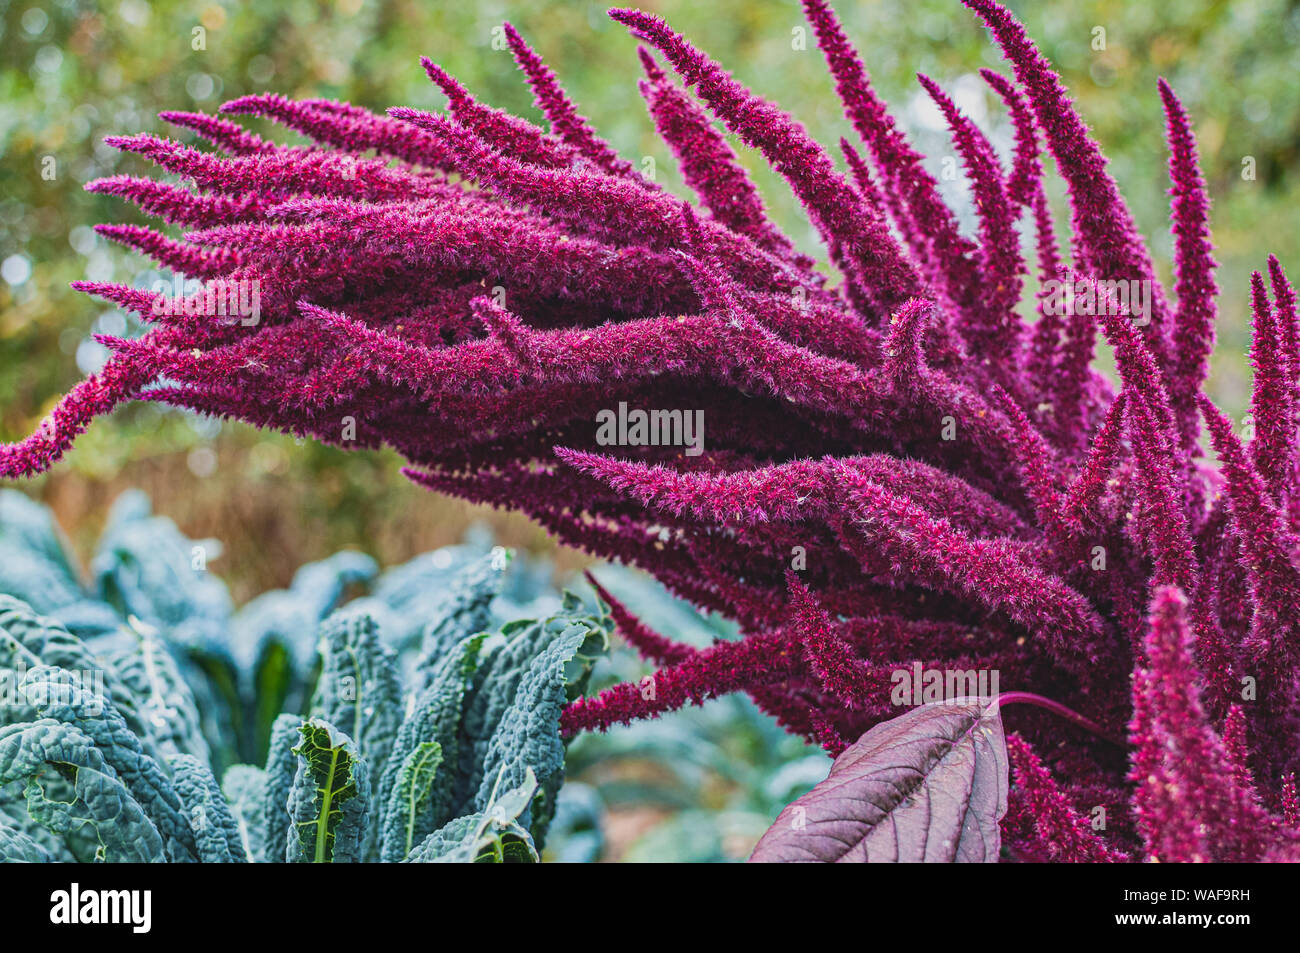 Purple Grain Amaranth (Amaranthus Hypocondriacus) plant is an ornamental plant commonly known as Prince of Wales feather or prince's feather. Stock Photo